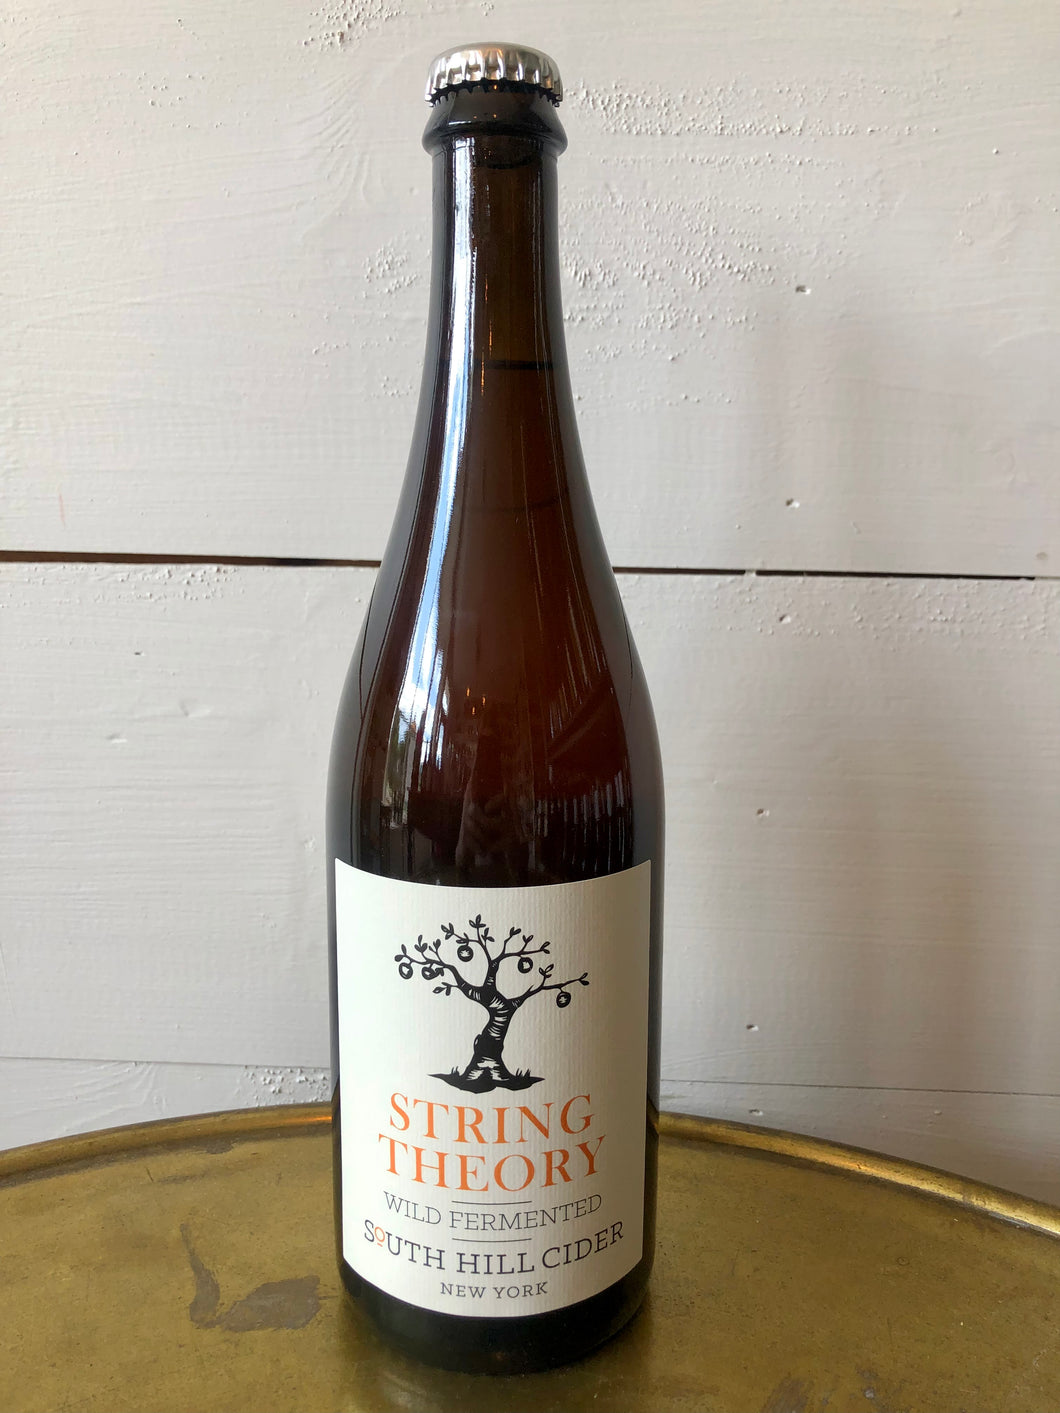 South Hill Cider, String Theory Wild Fermented (NV)